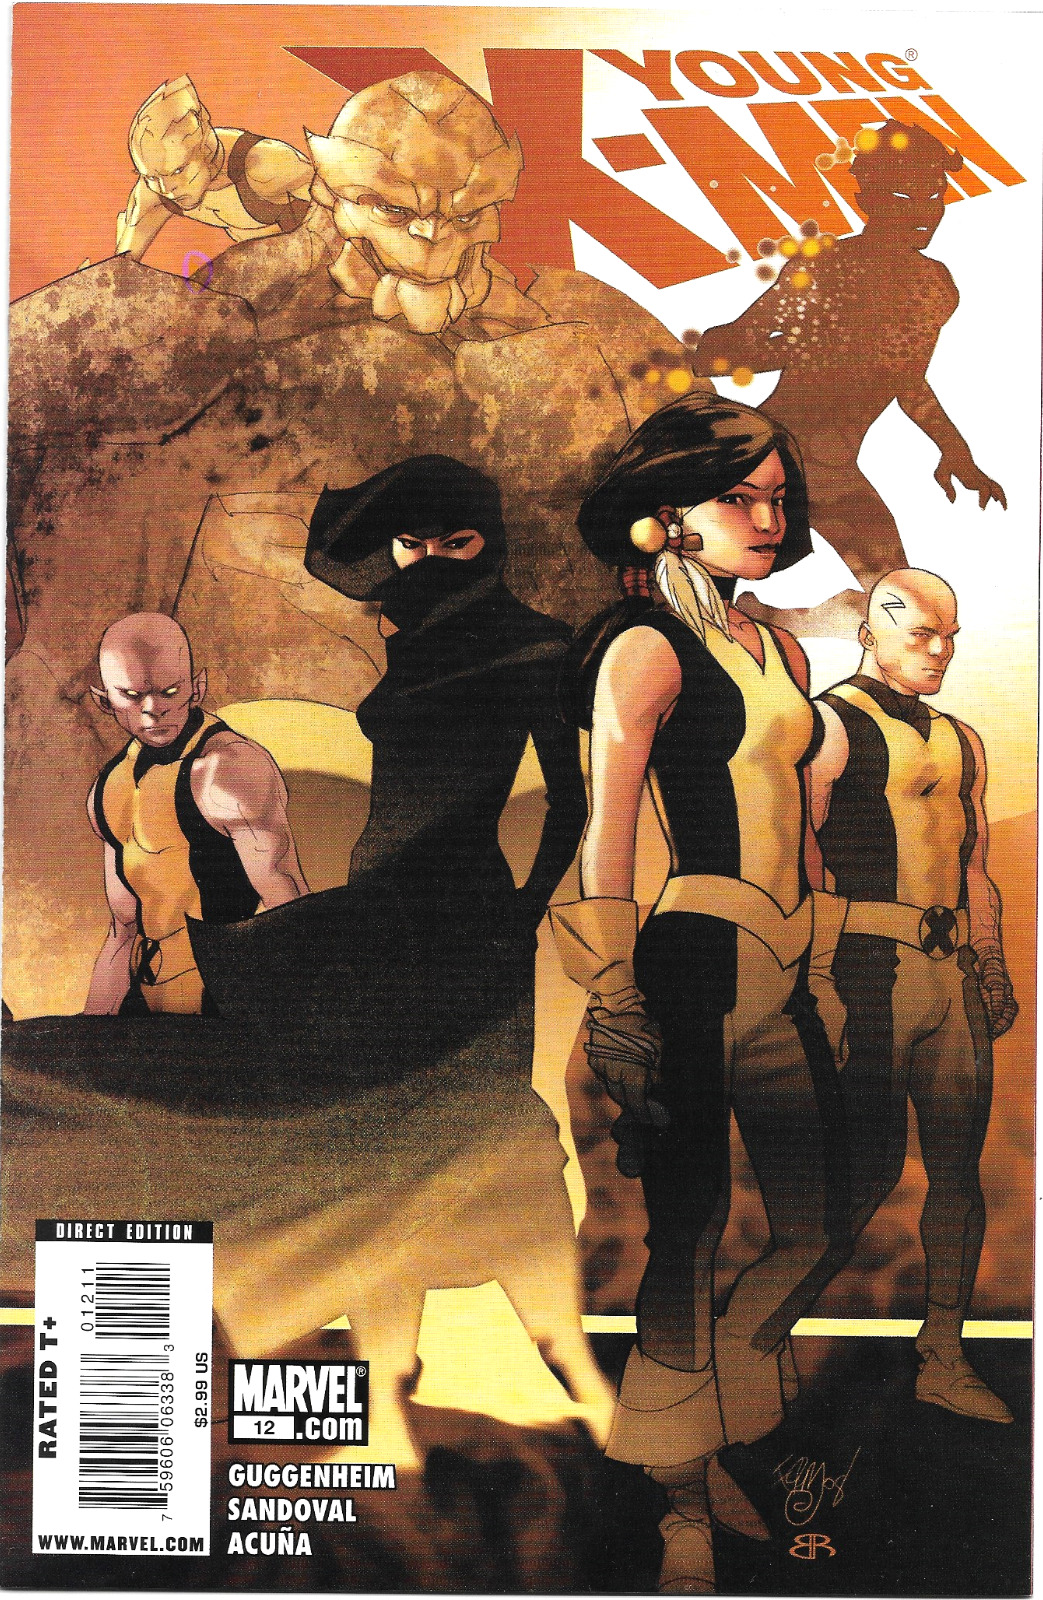 Young X-Men #12 - 2009 Marvel Comics End of Days part 2: Dust to Damned